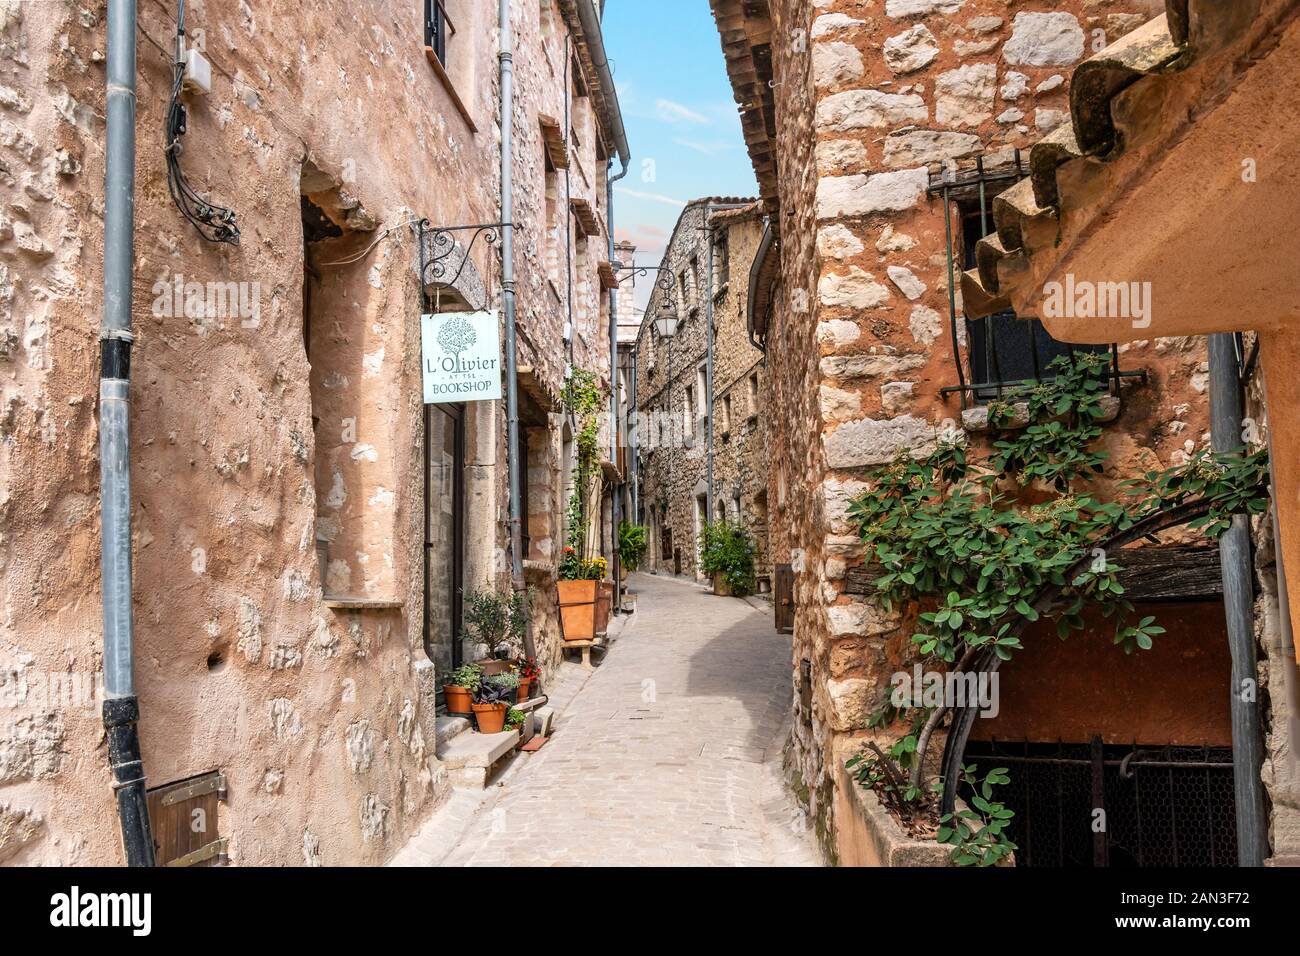 One of the many narrow alleys filled with homes and shops in the medieval walled village of Tourrettes Sur Loup in the Alpes-Maritimes area of France. Stock Photo